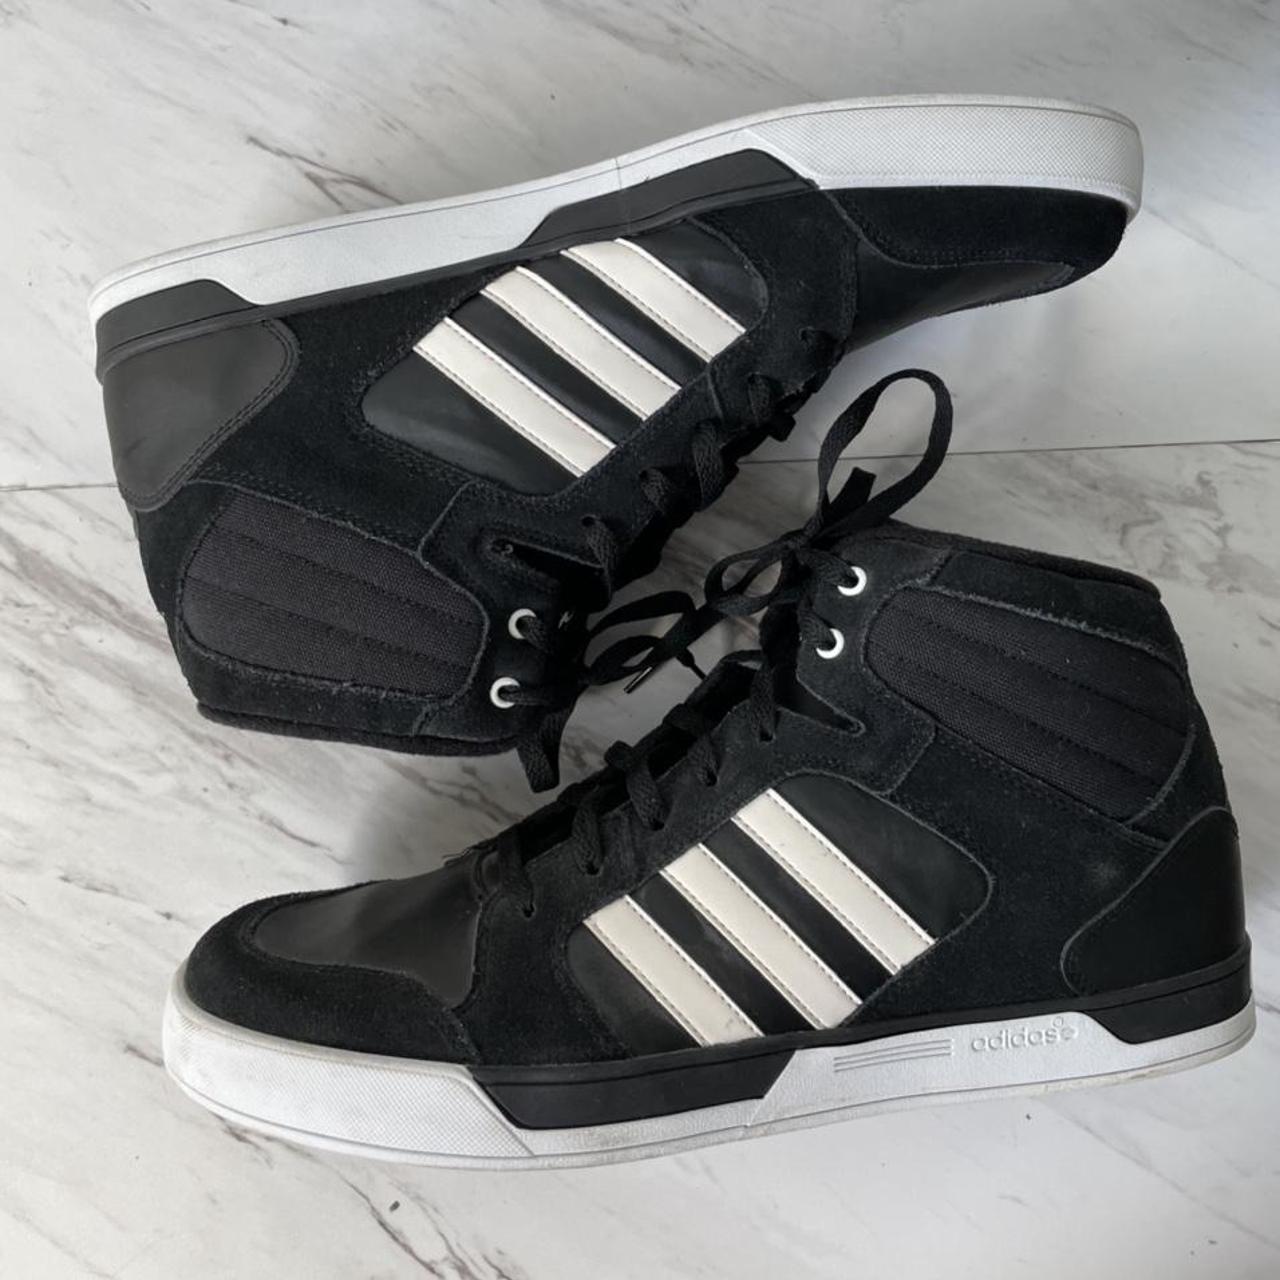 Adidas black and white Neo label high tops - Depop